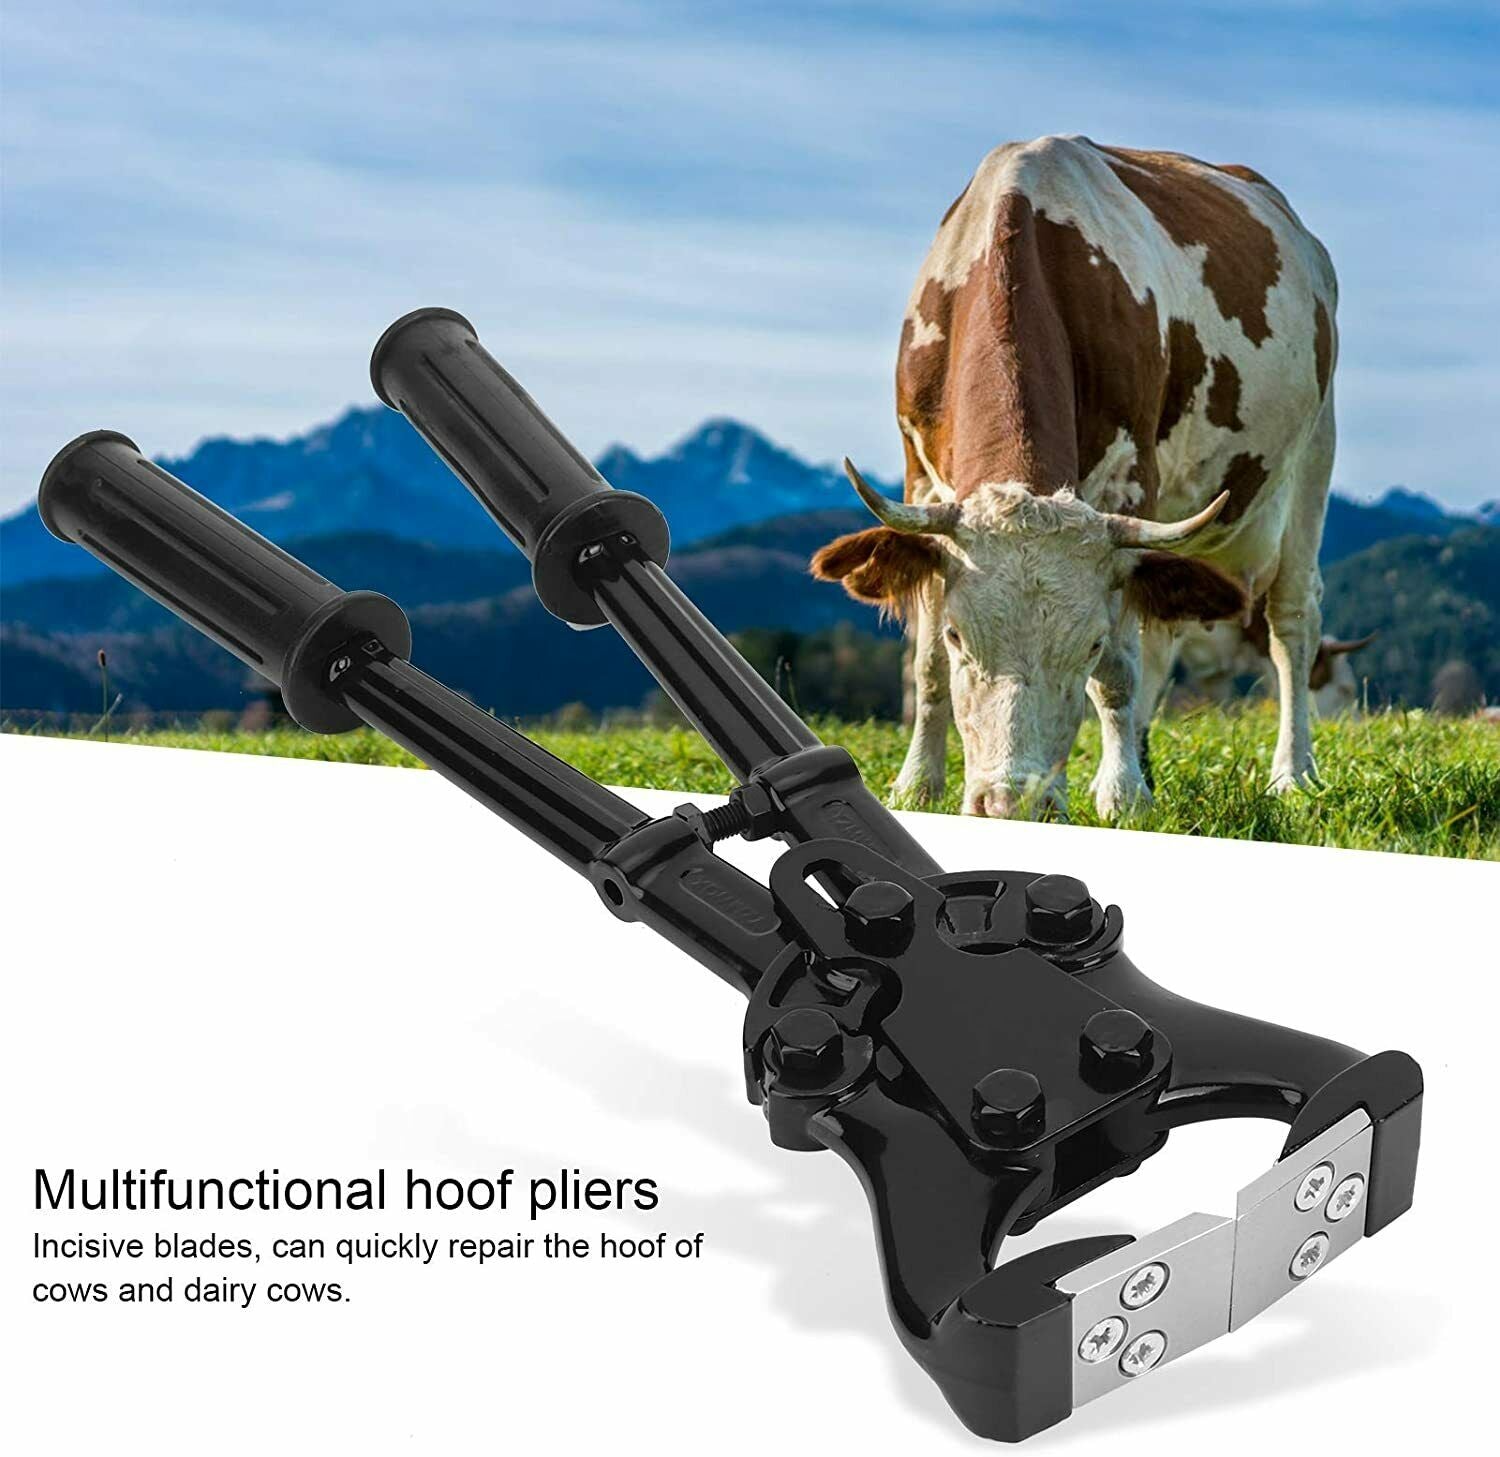 Stainless Steel Hoof Claw Cutter, Hoof Pincers for Hoof Trimming Farm Tool